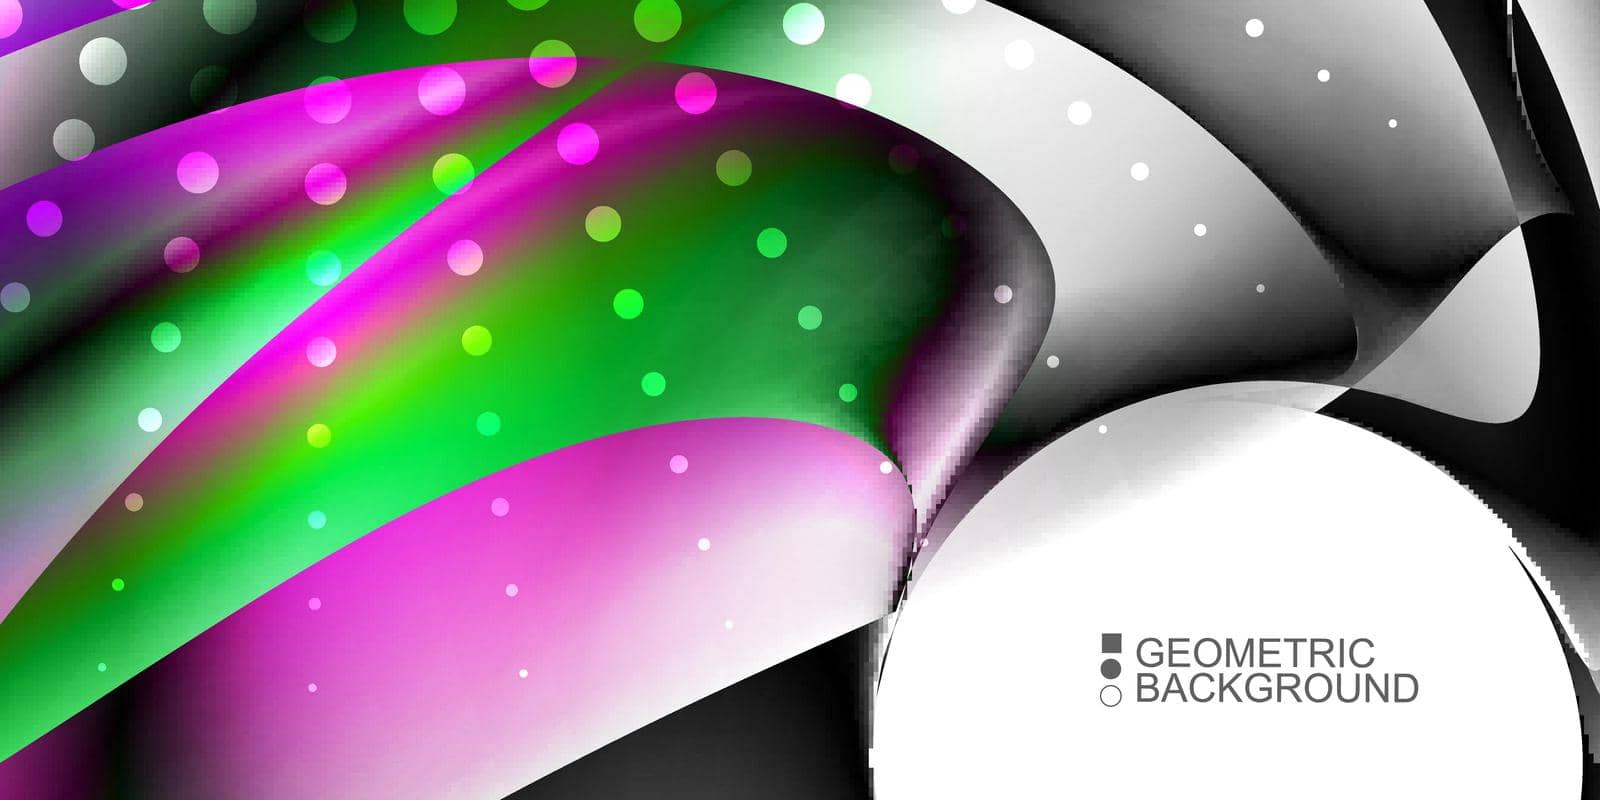 Geometric abstract background template with fluid waves in blurred colors